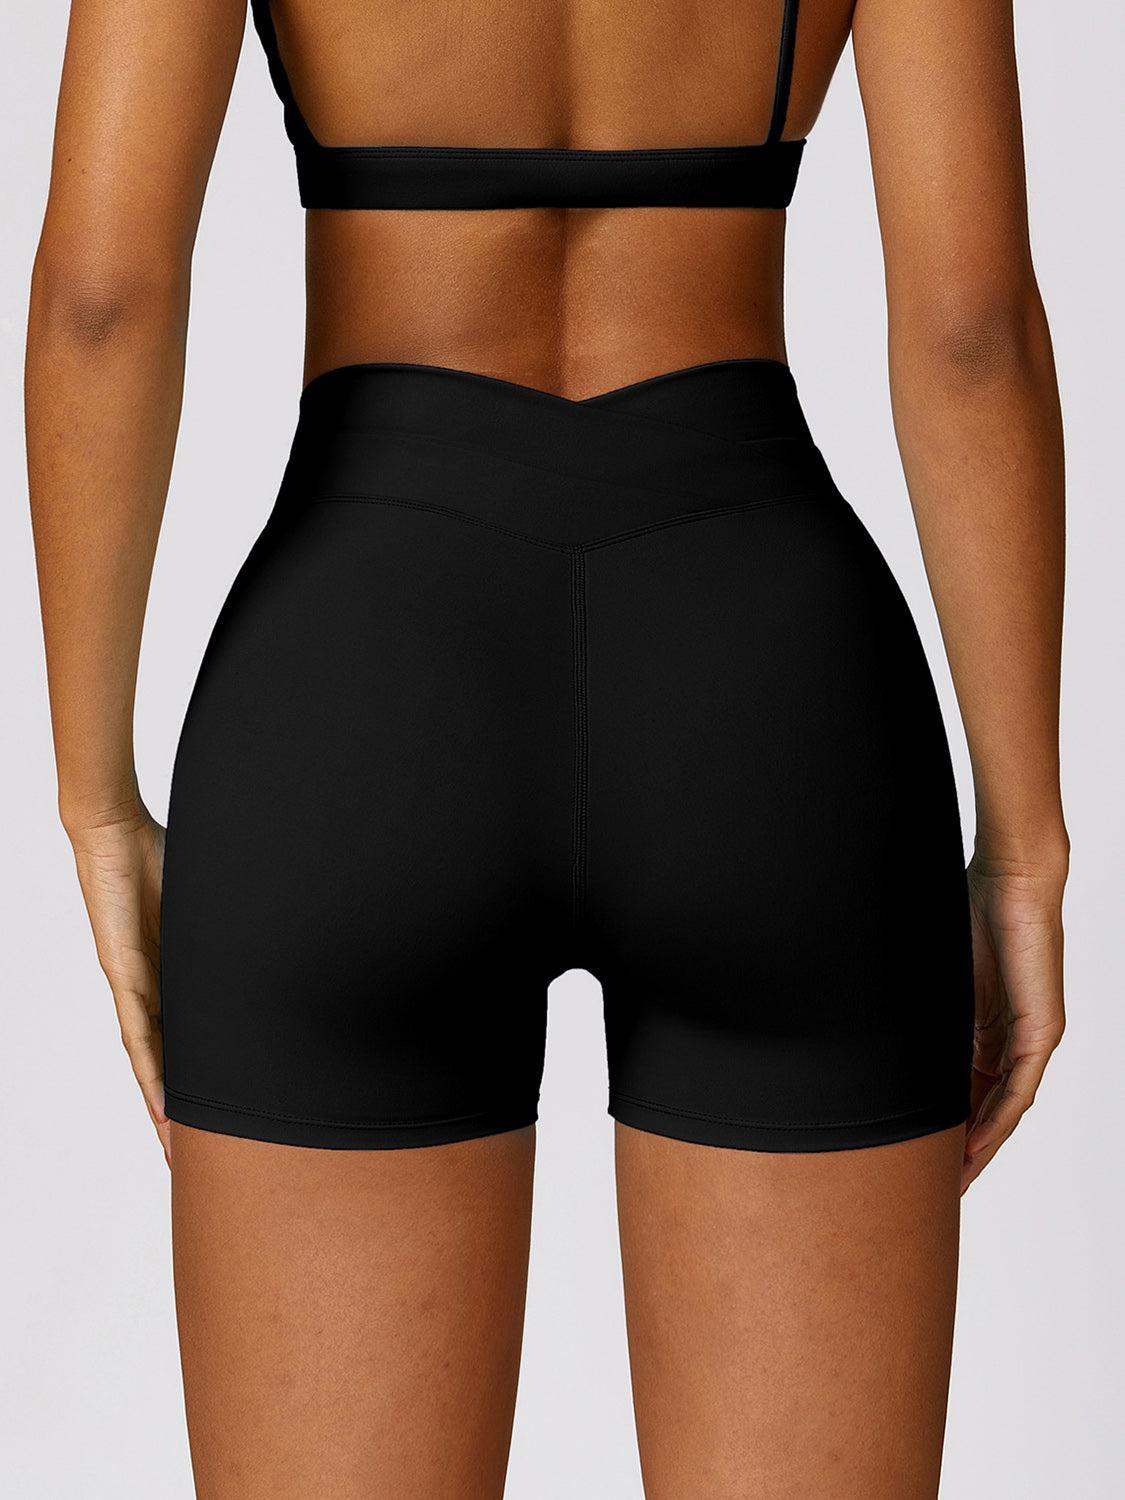 the back of a woman in black shorts